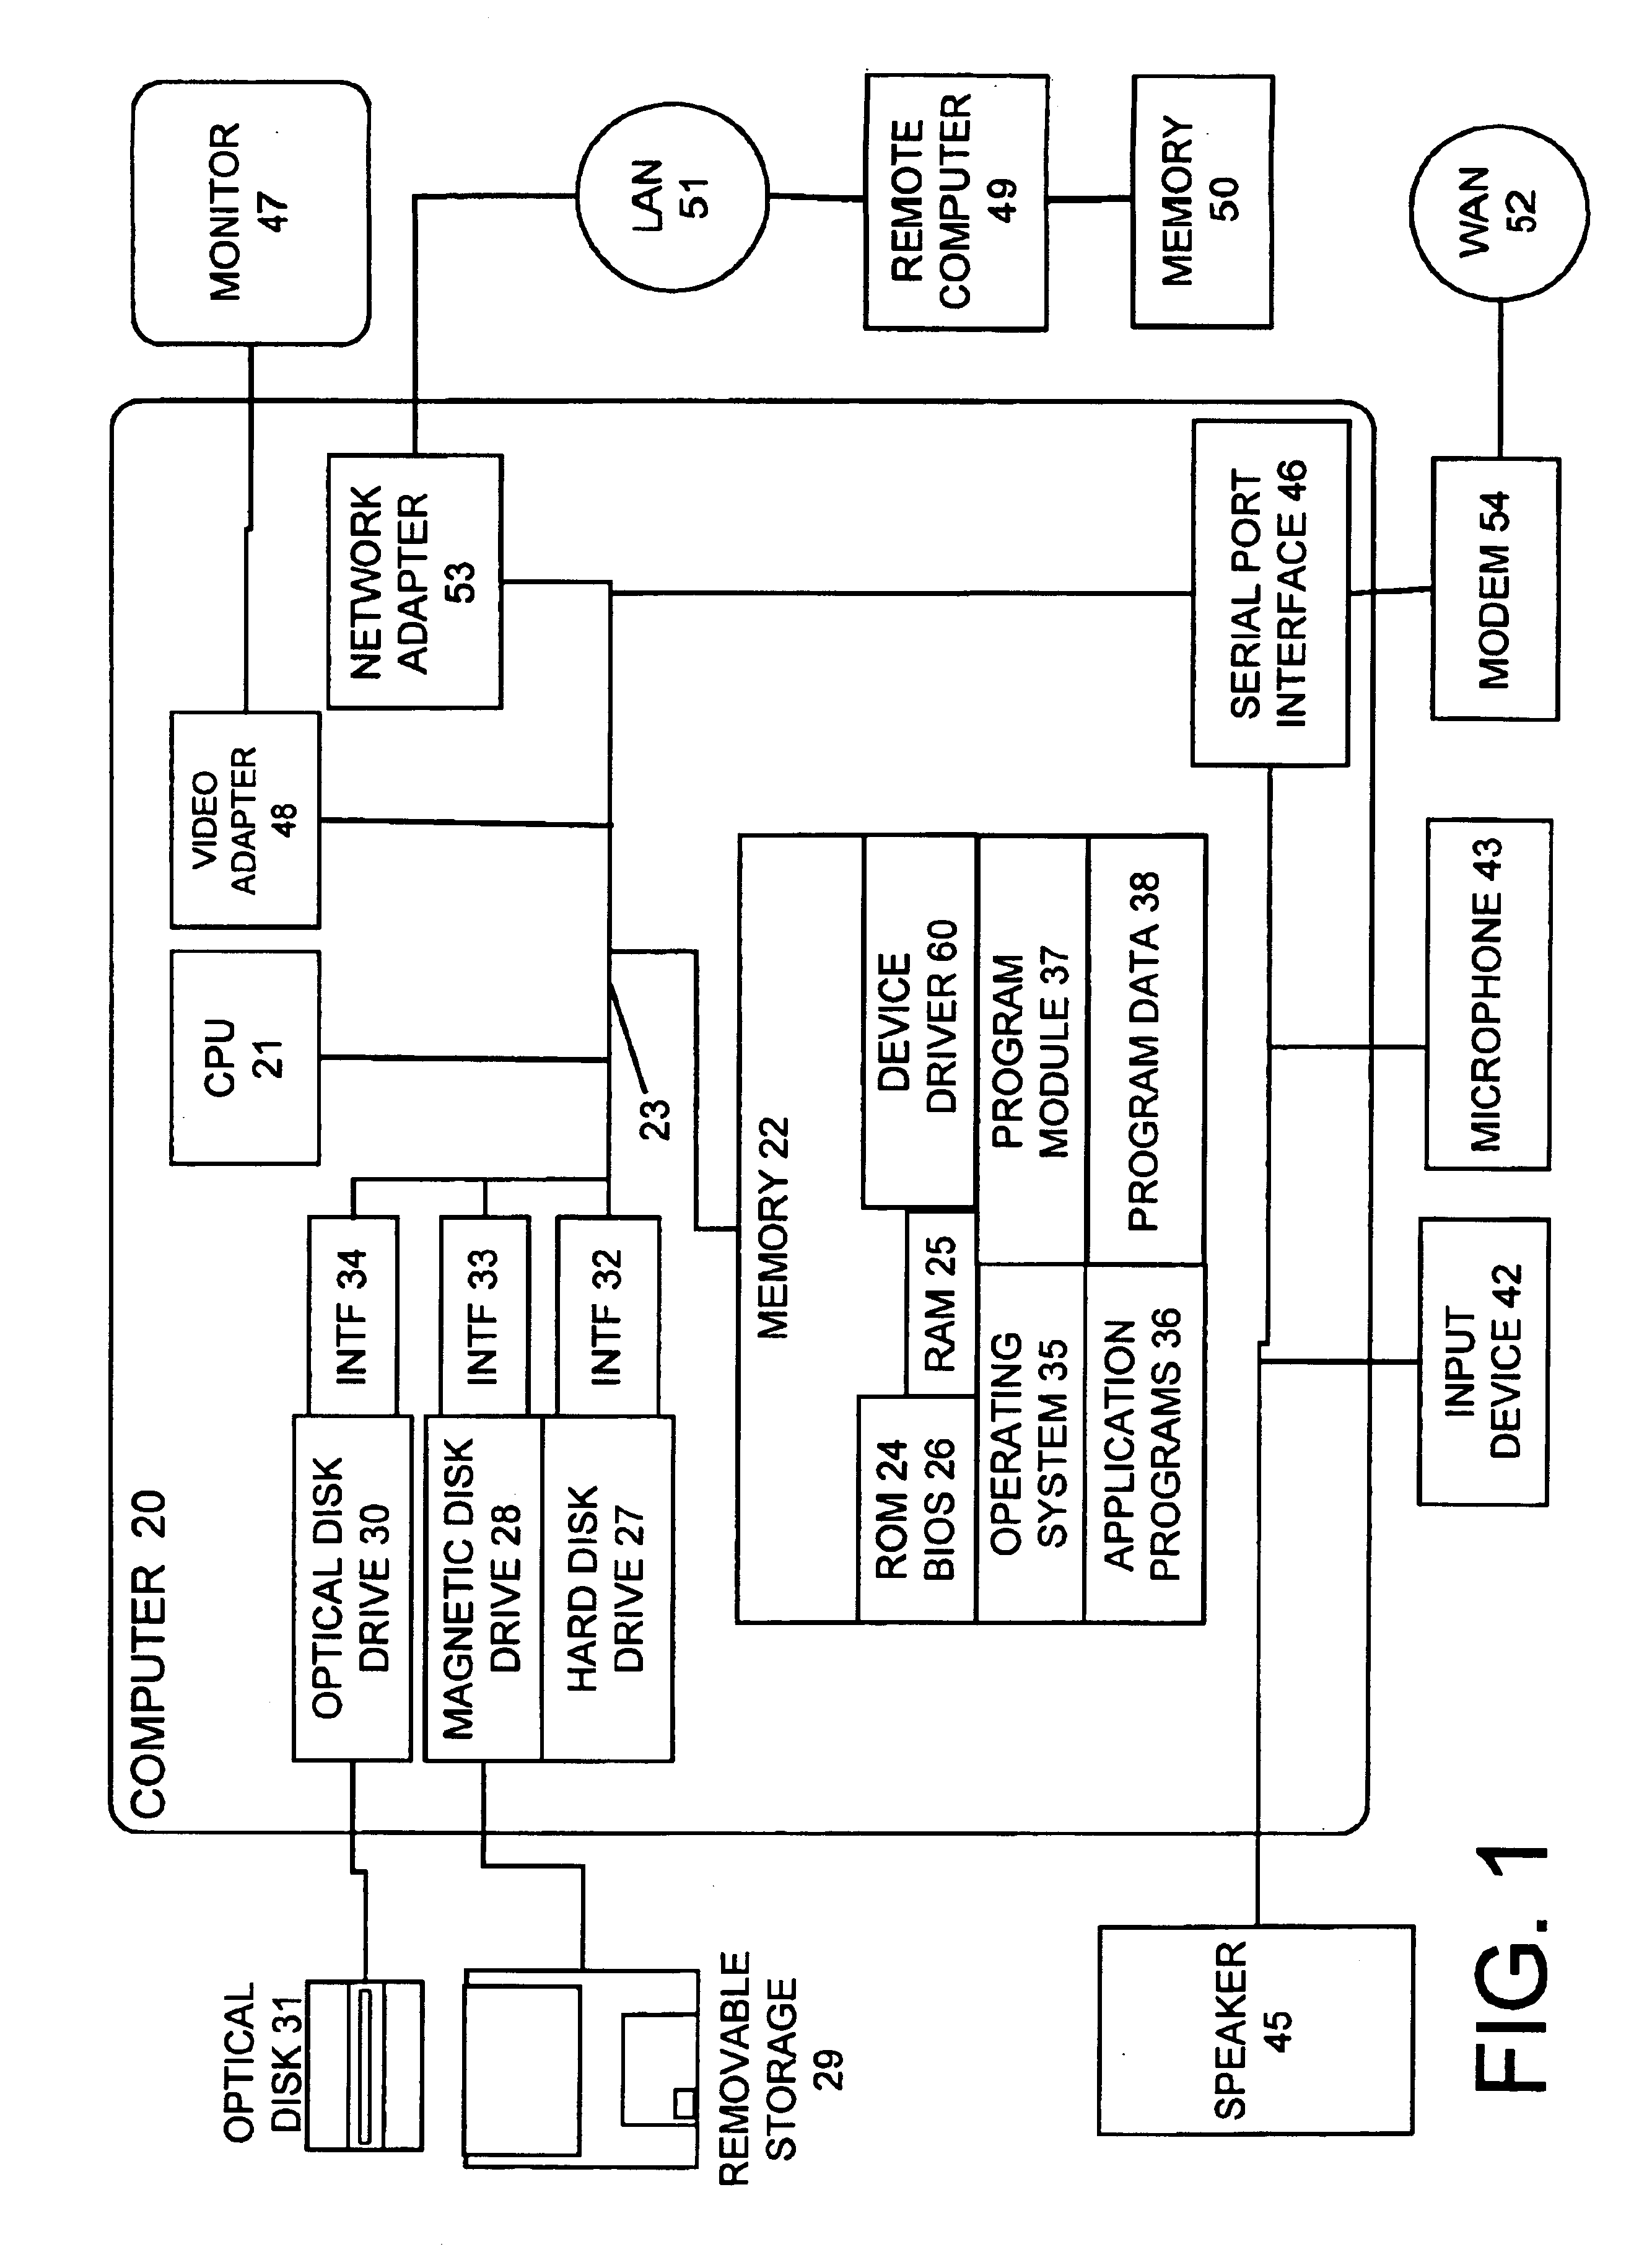 Method and apparatus for computer input using six degrees of freedom